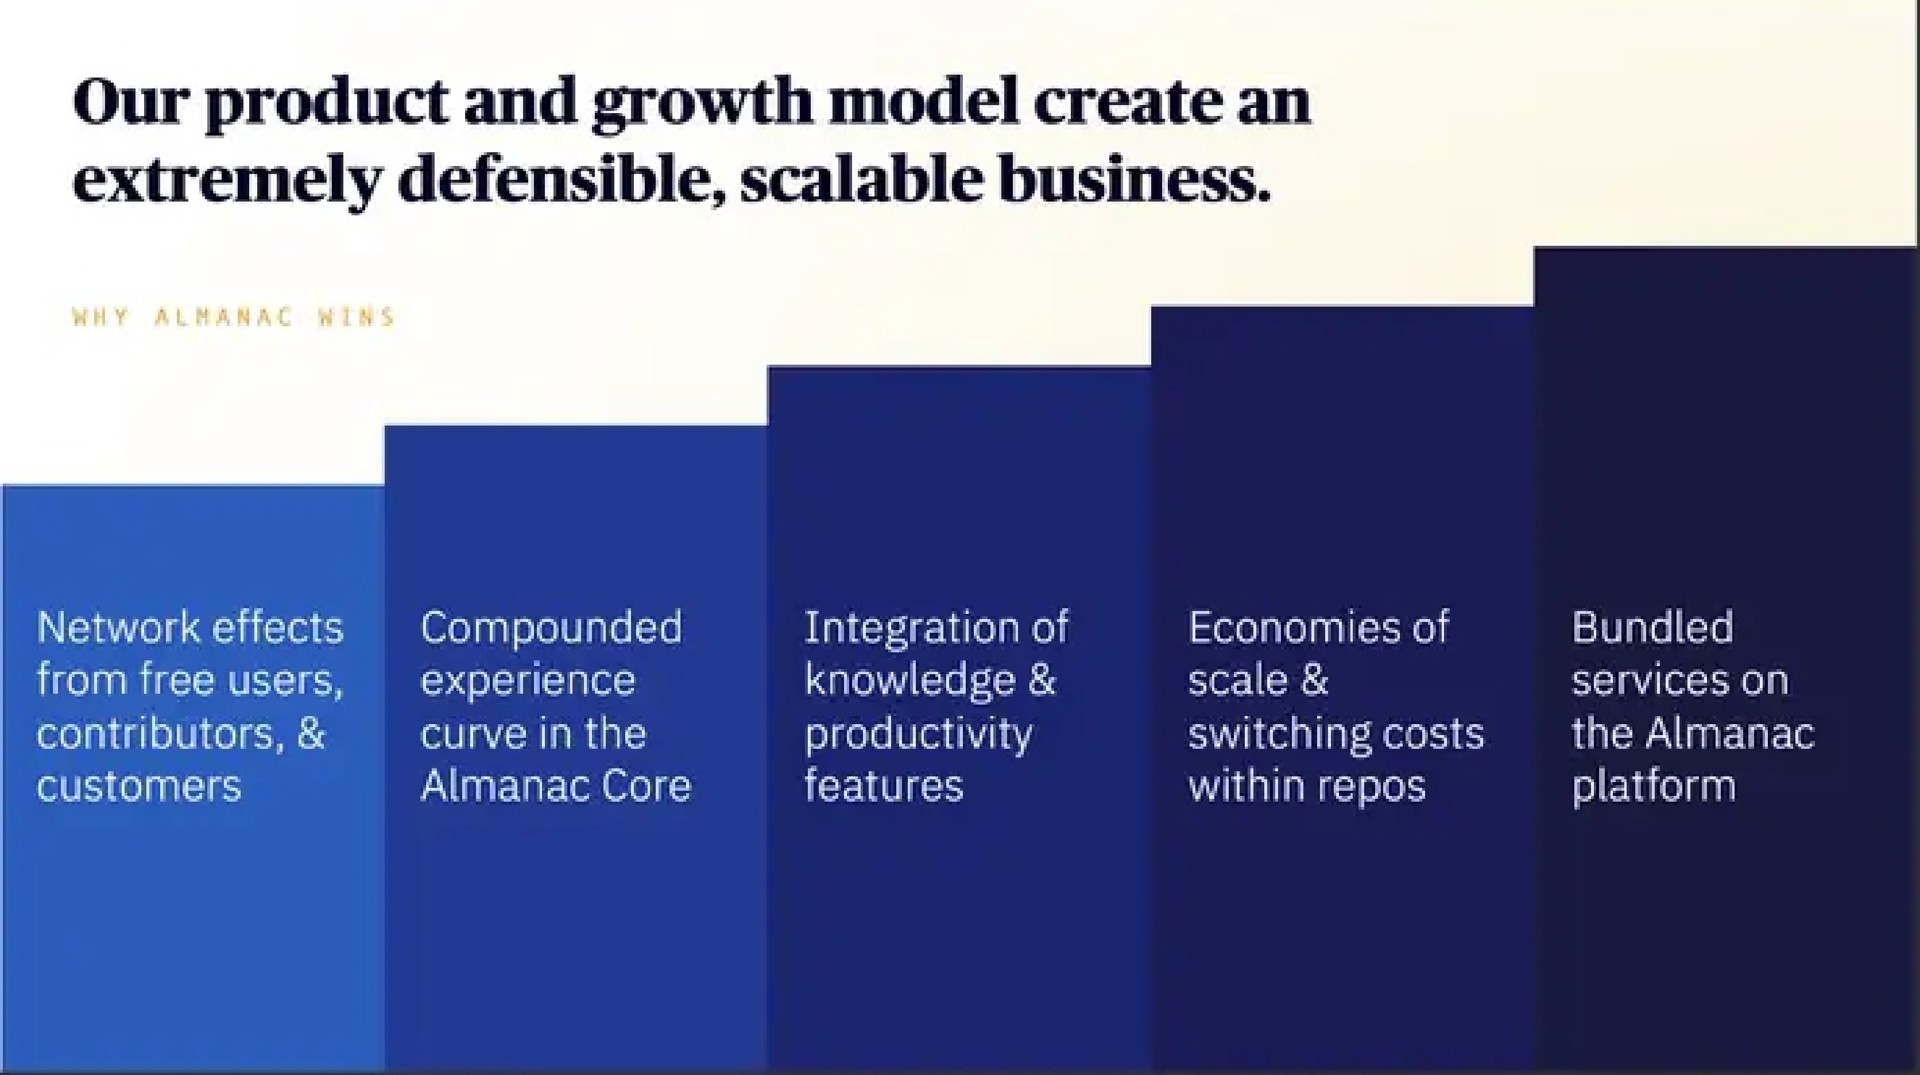 our product and growth model create an extremely defensible scalable business | Almanac